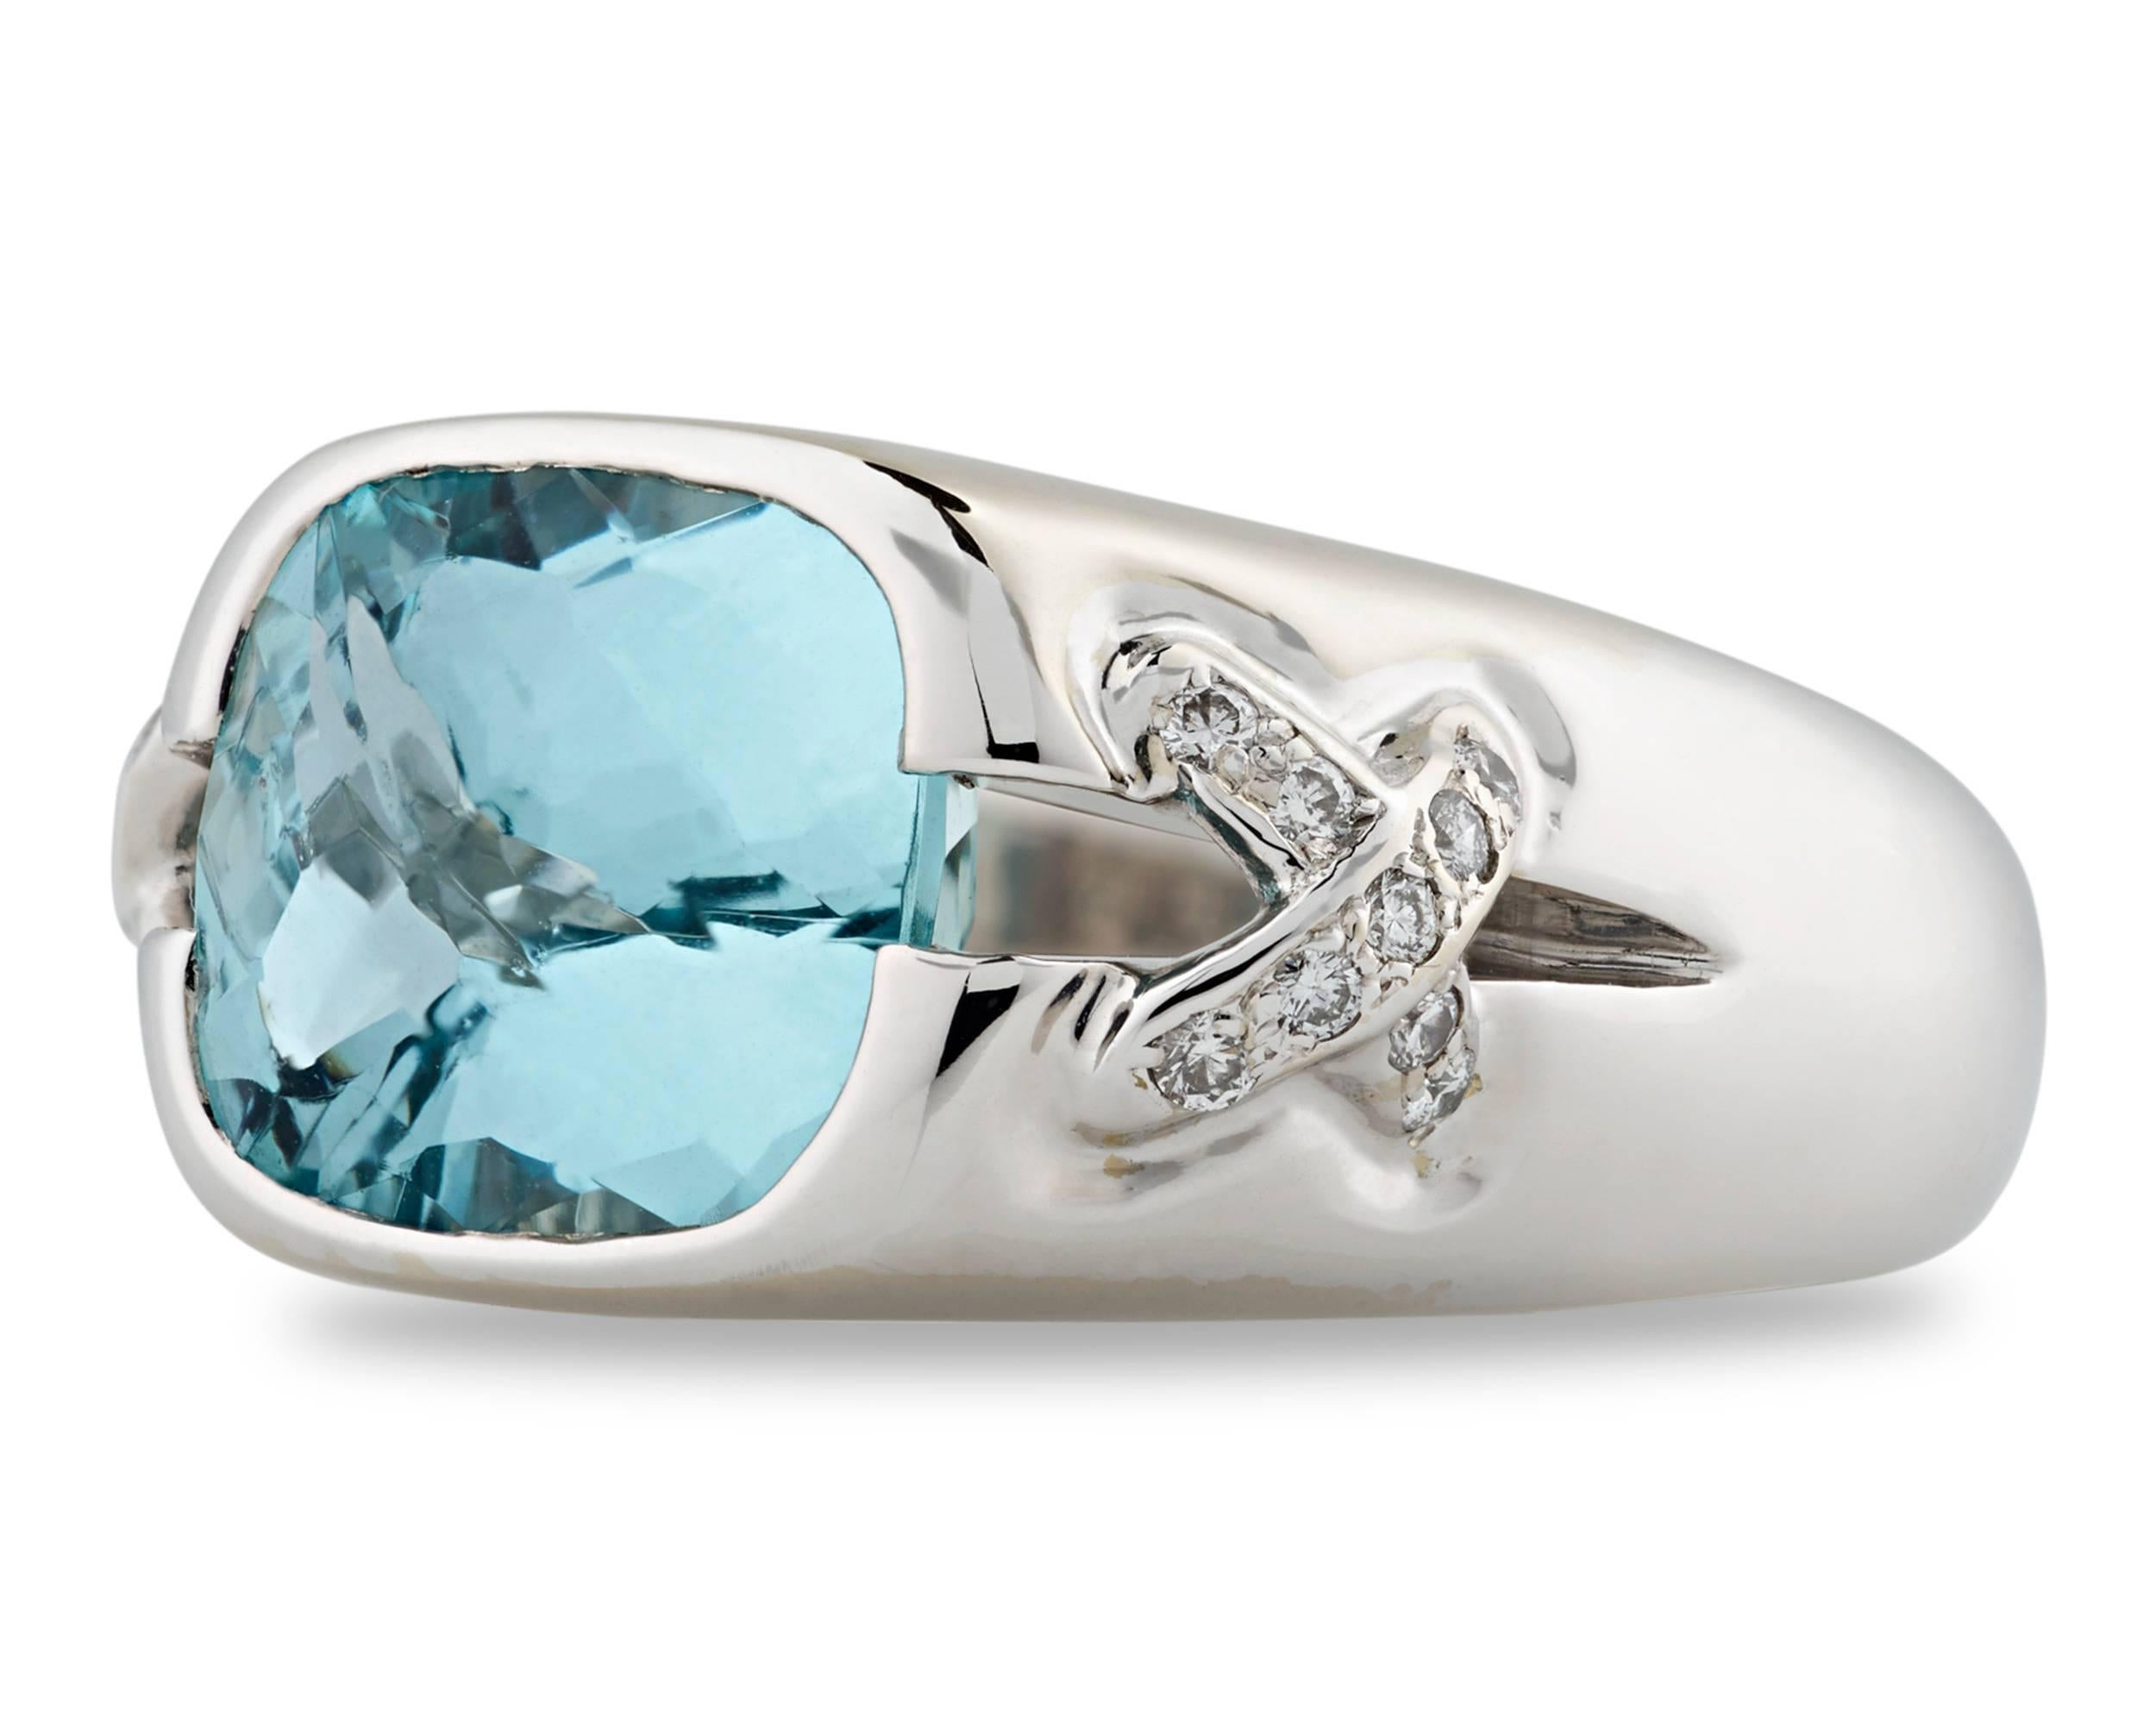 An exceptional aquamarine weighing approximately 5.00 carats is the star of this ring by Tiffany & Co. Sparkling with a rare Santa Maria blue hue, the gem is beautifully on display in an 18k white gold setting studded with white diamonds.

One of